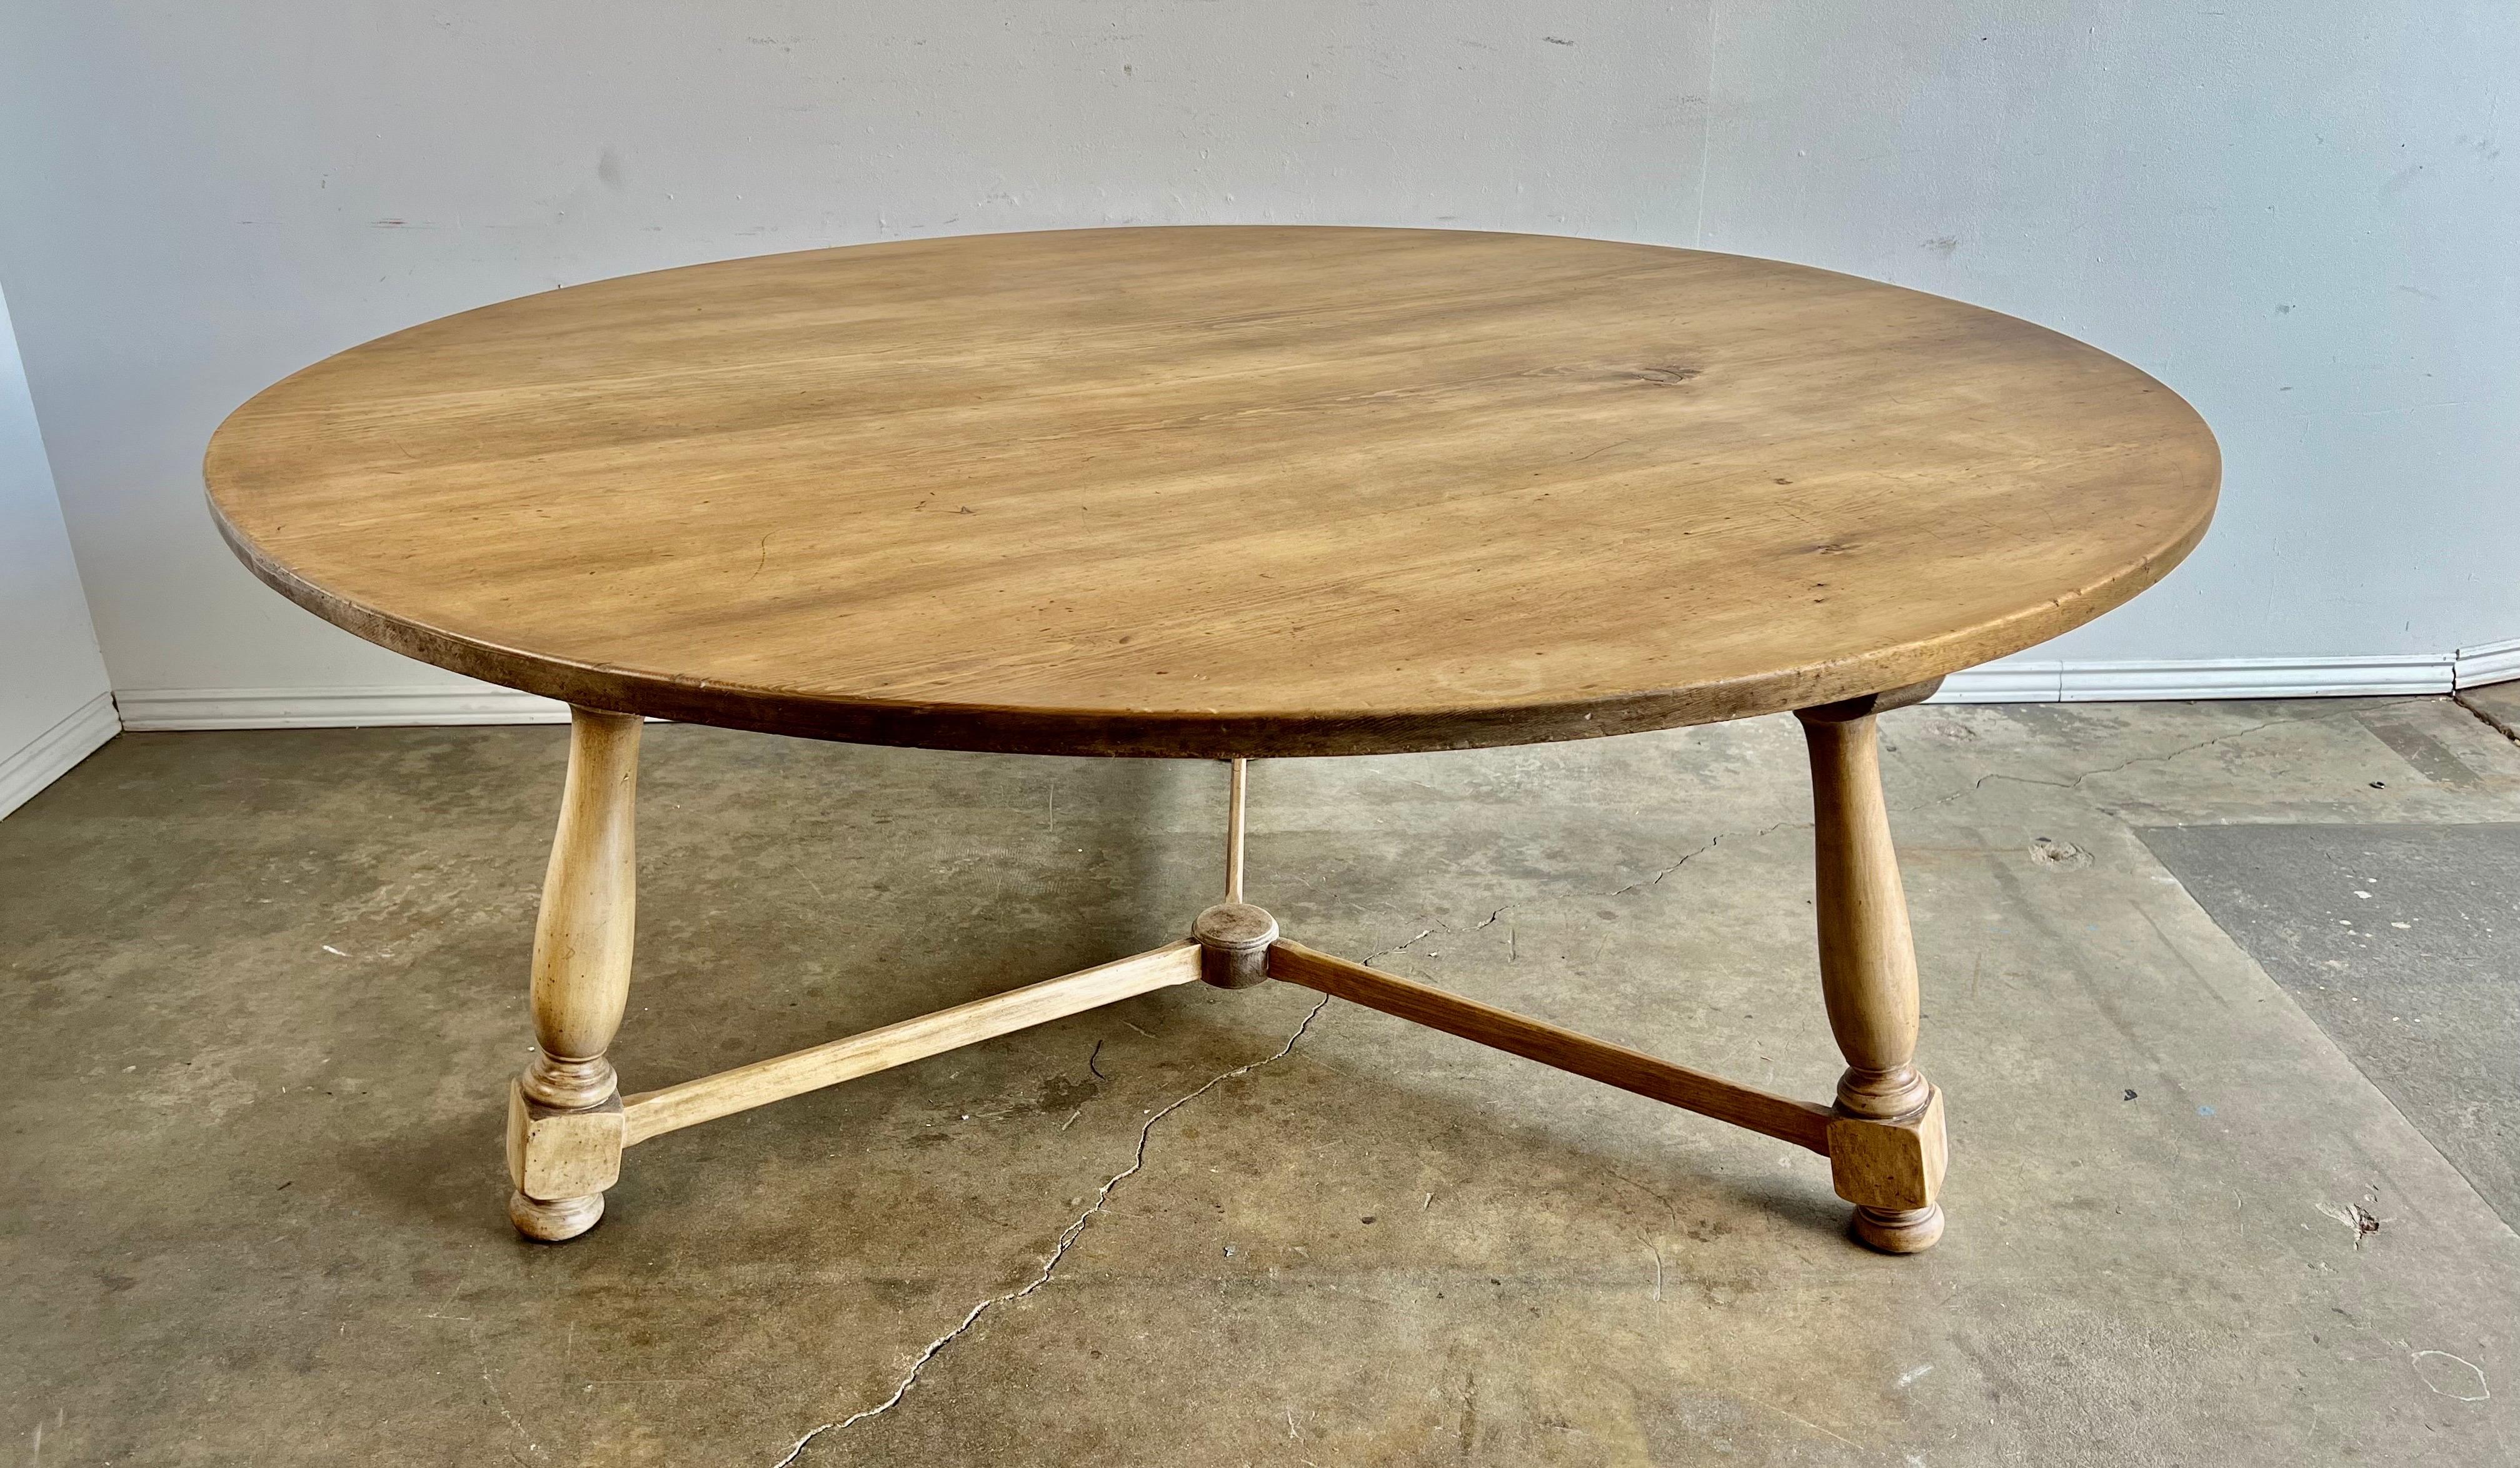 19th c. Swedish round shaped dining table. The table stands on a tripod base connected by a center stretcher. The table has a light bleached natural looking finish. It is a great table for any style decor.